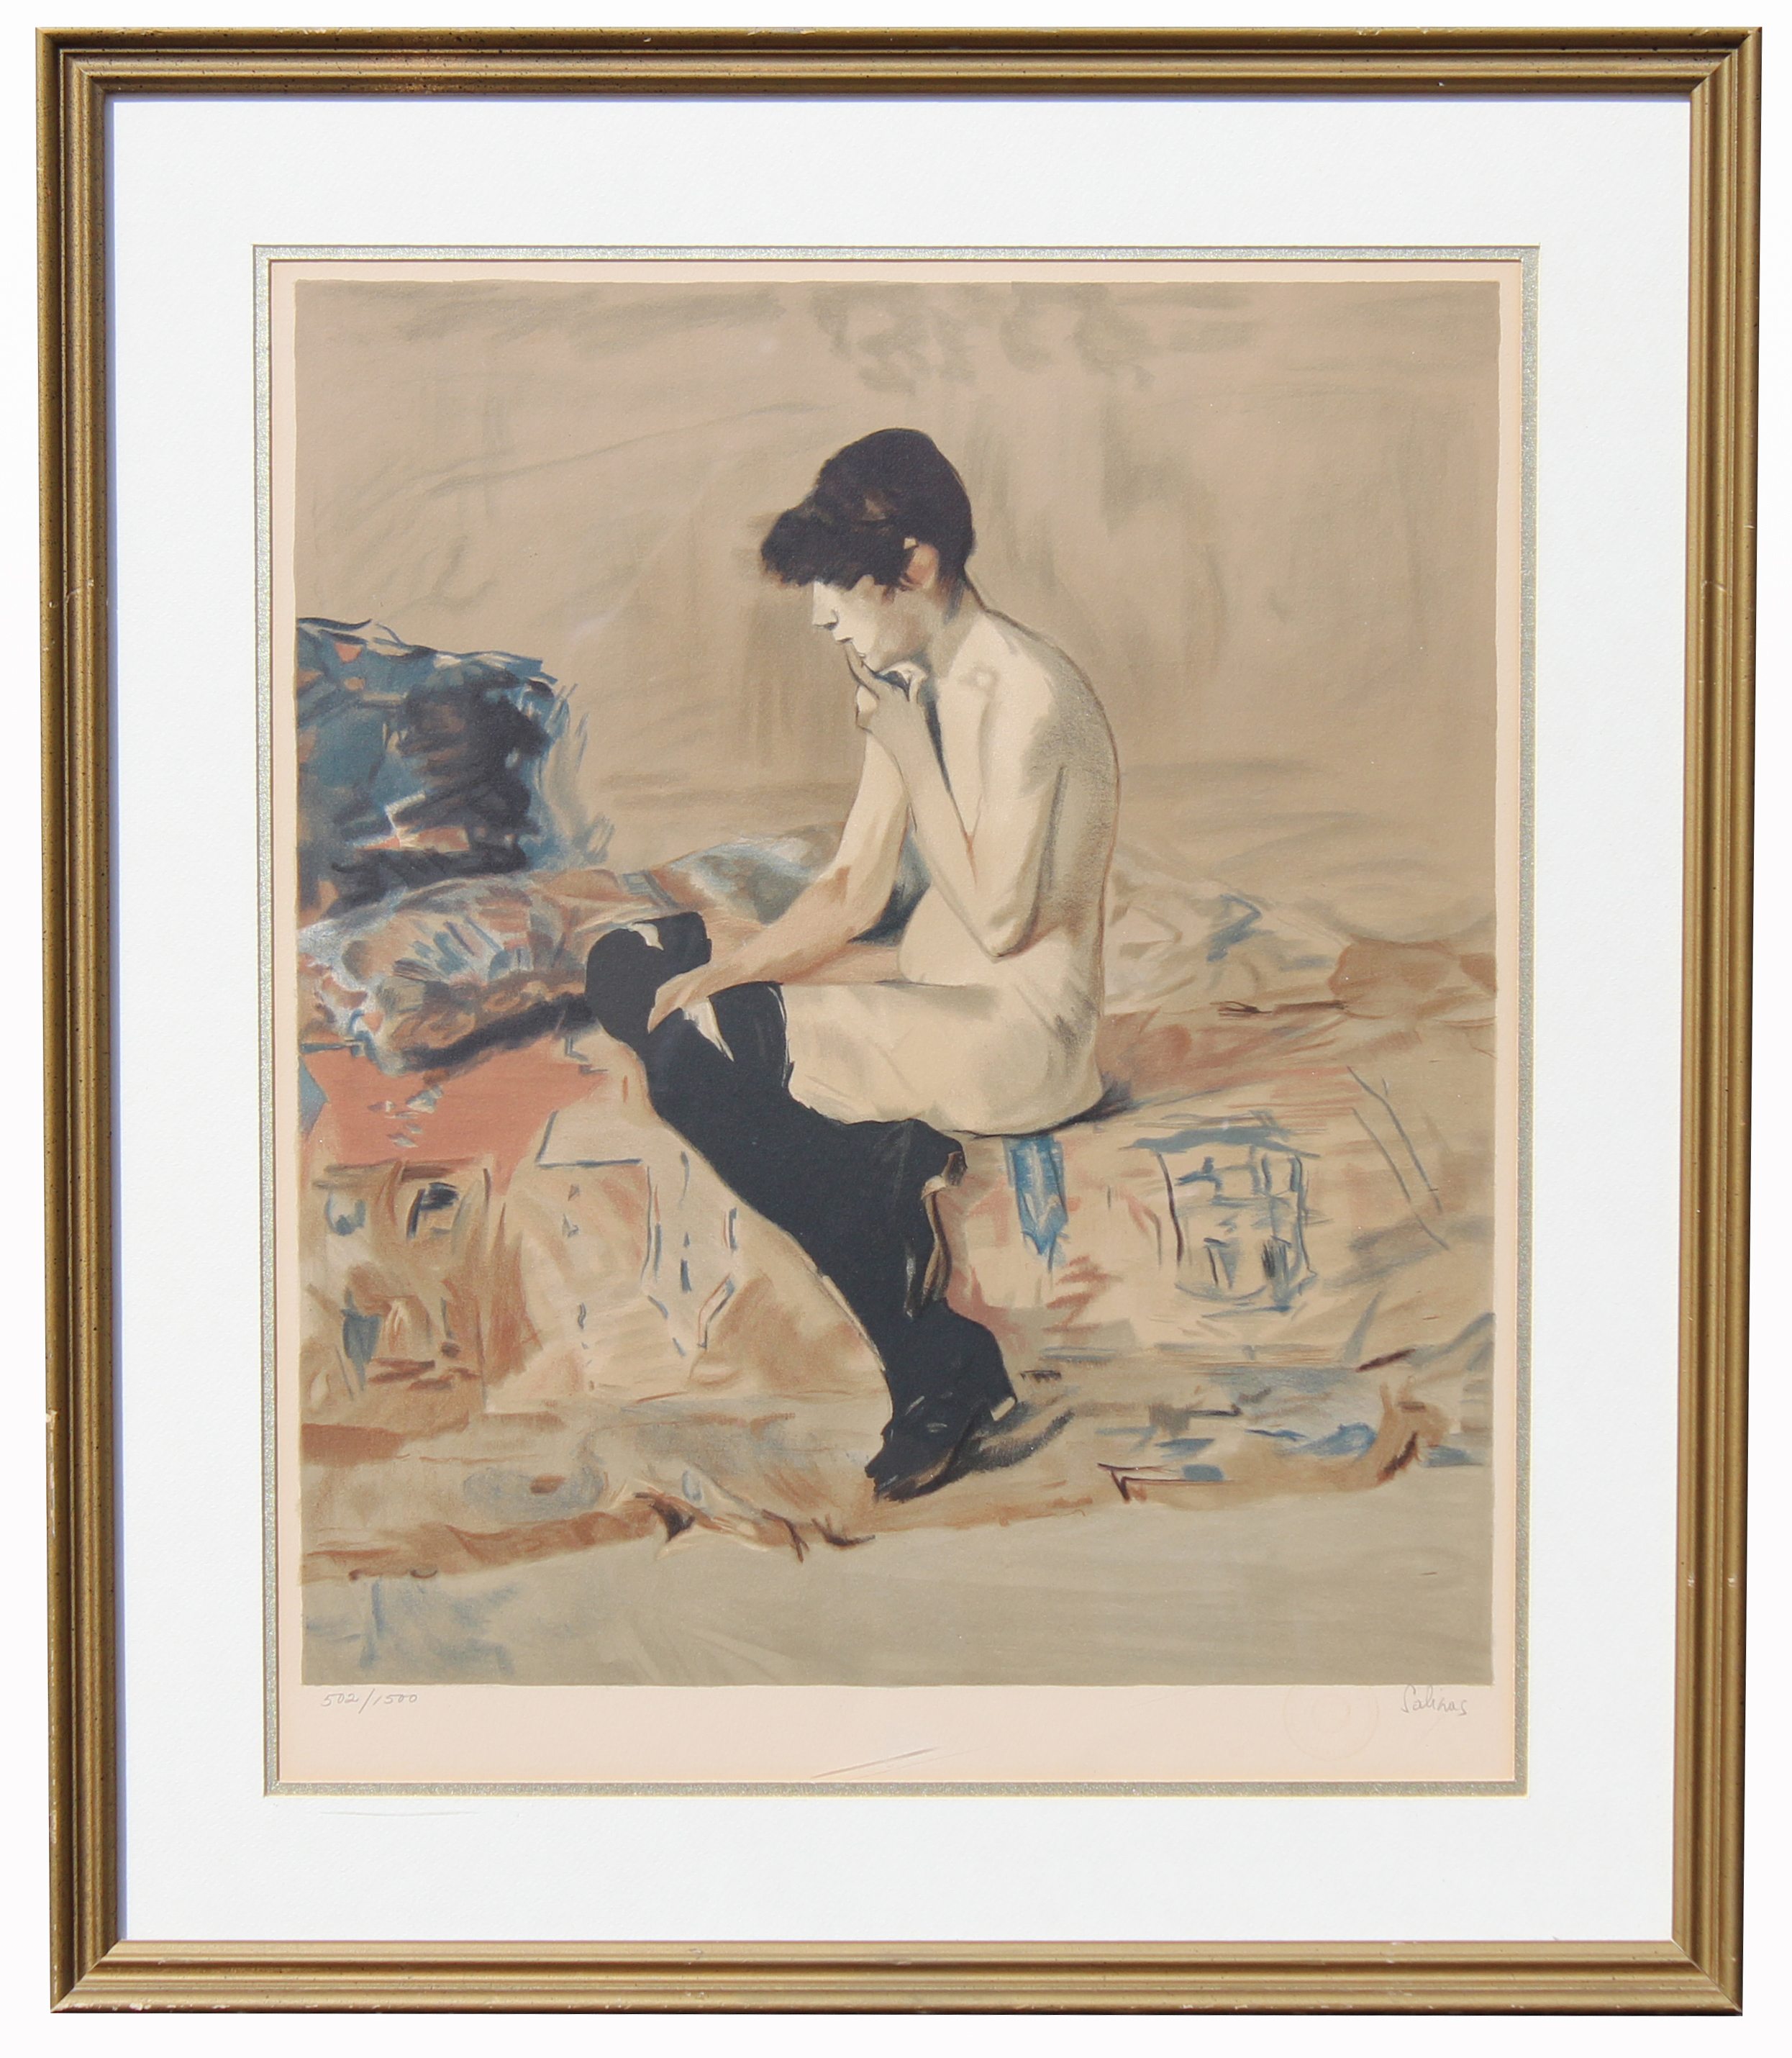 Salinas, Signed Lithograph of Figure in Bedroom. Pencil signed and numbered 502/1500 in lower